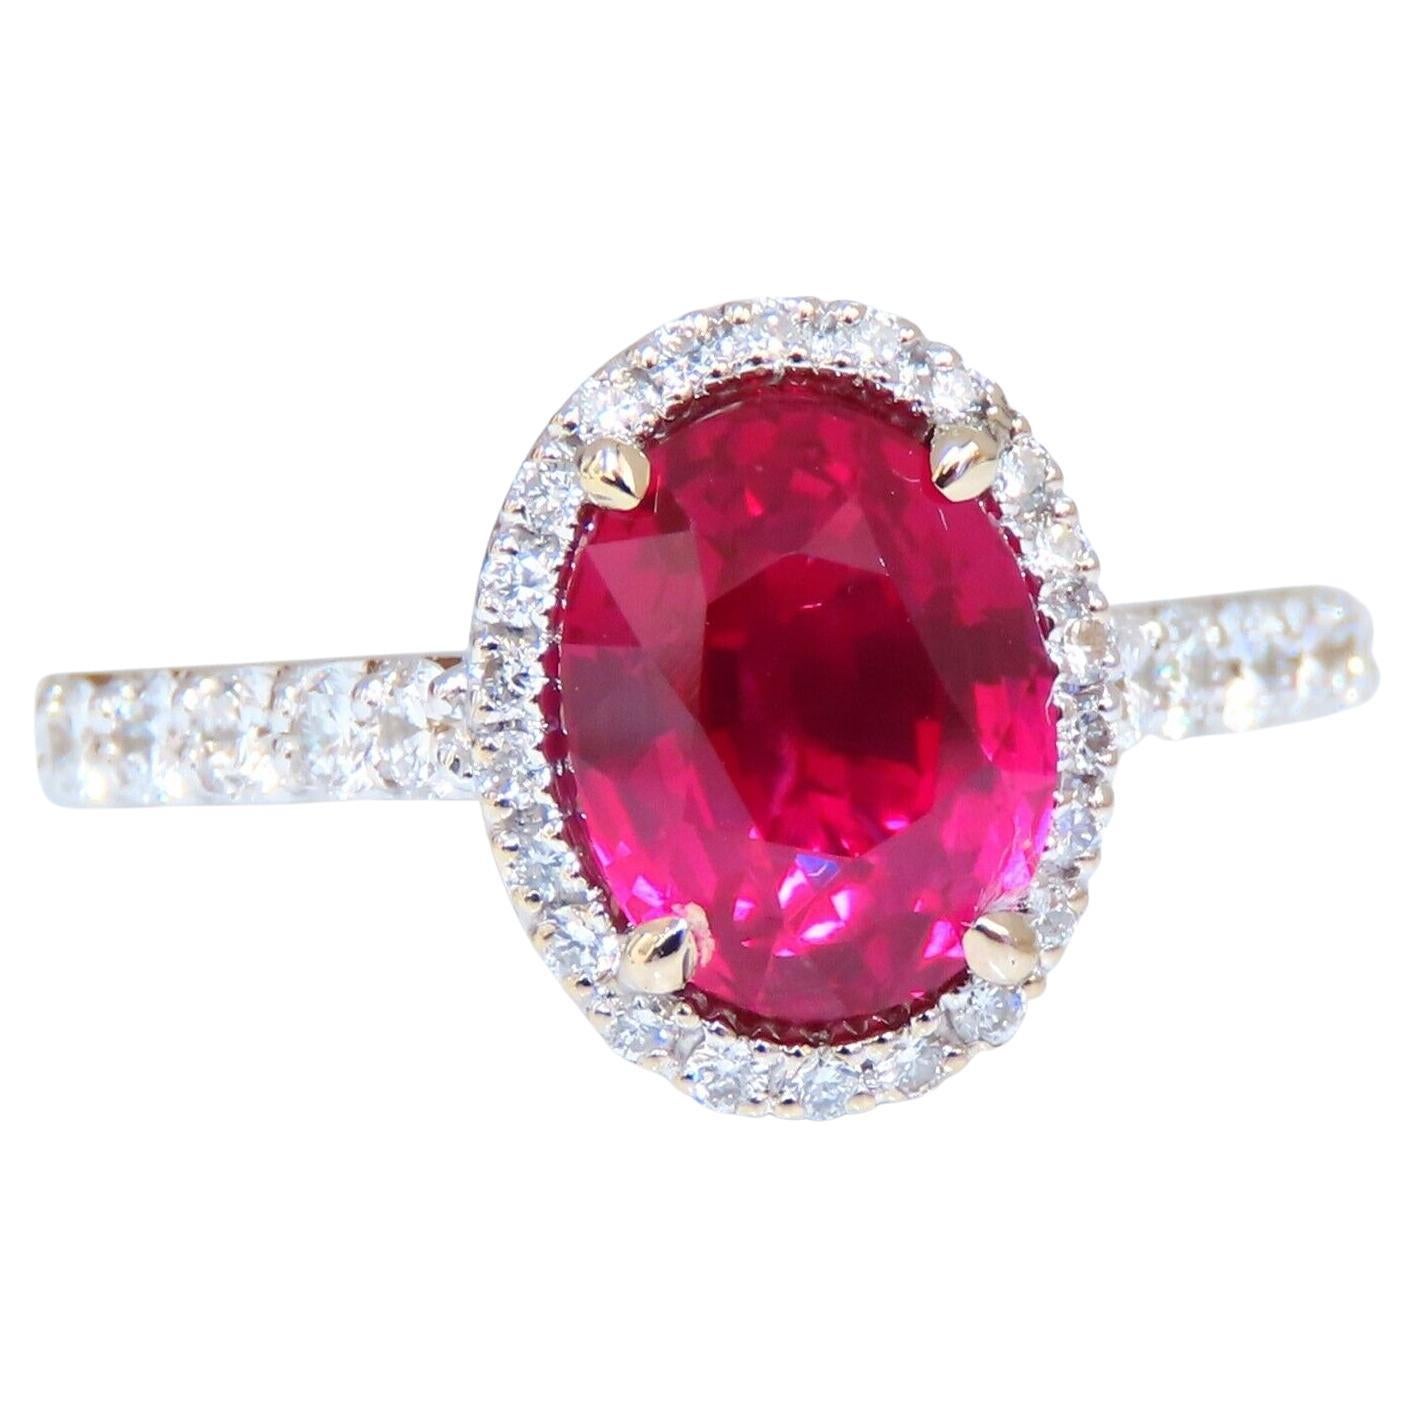 GIA Certified 3.03ct No Heat Natural Ruby Diamond Ring 18kt Classic Halo